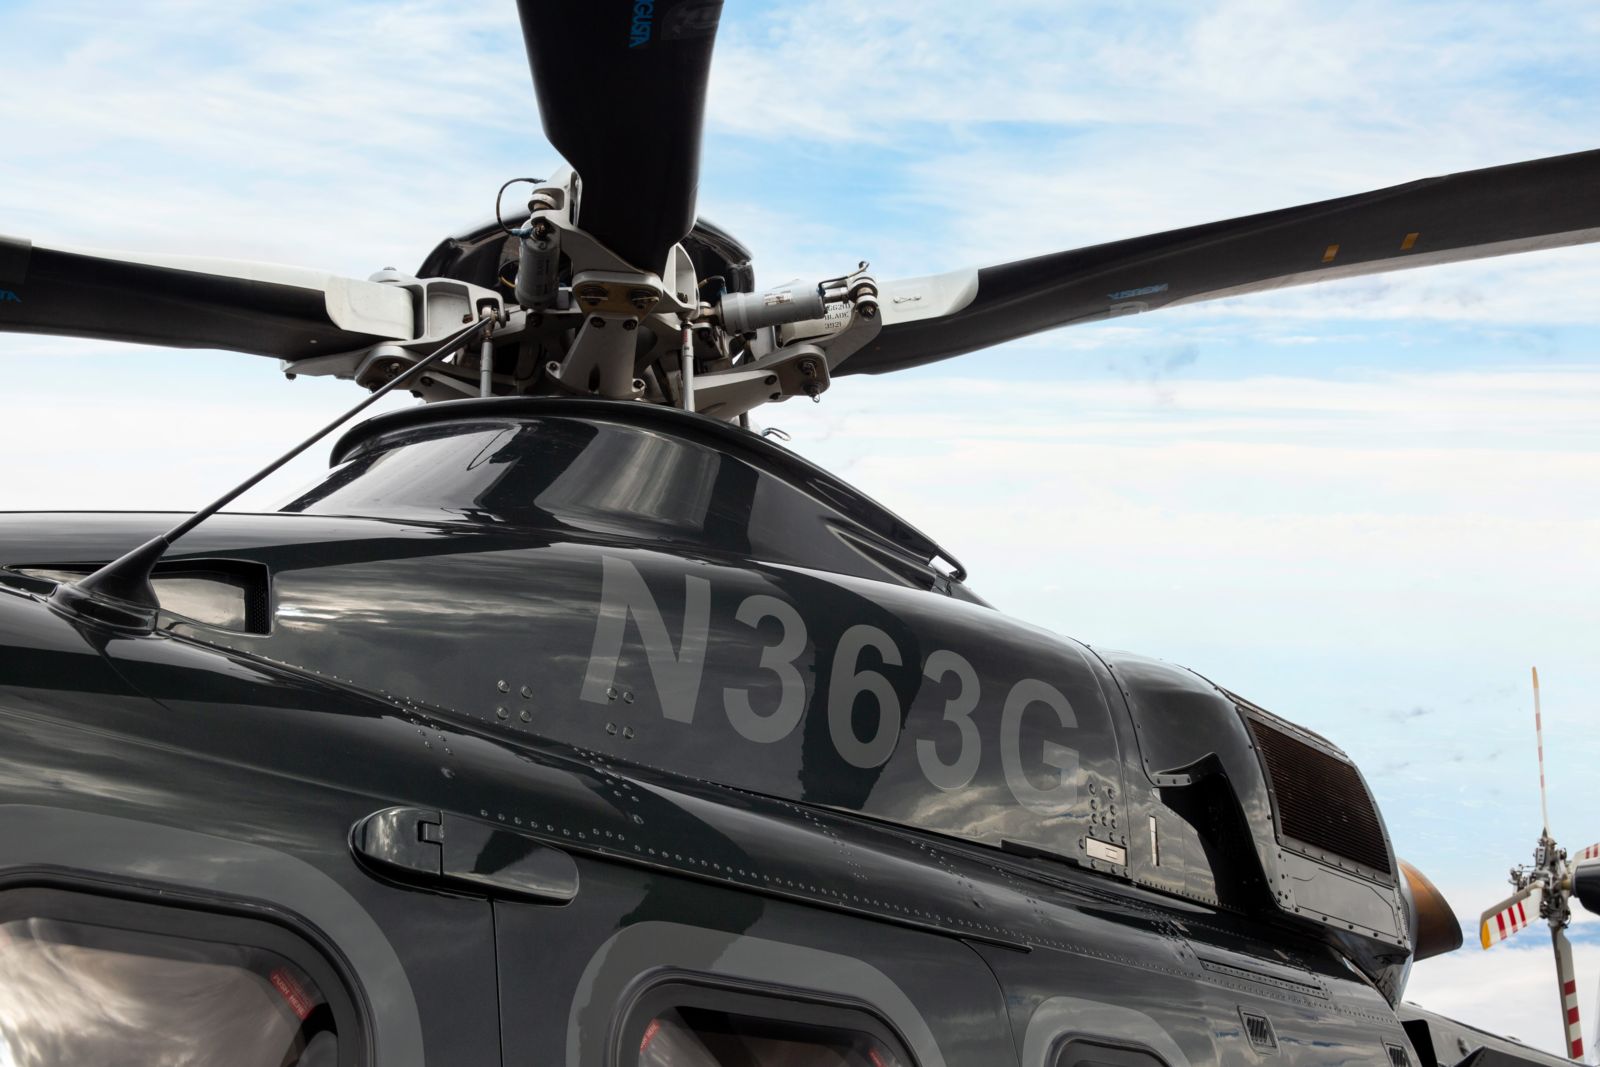 Agusta AW139  S/N 41531 for sale | gallery image: /userfiles/files/bfp_8656.jpg